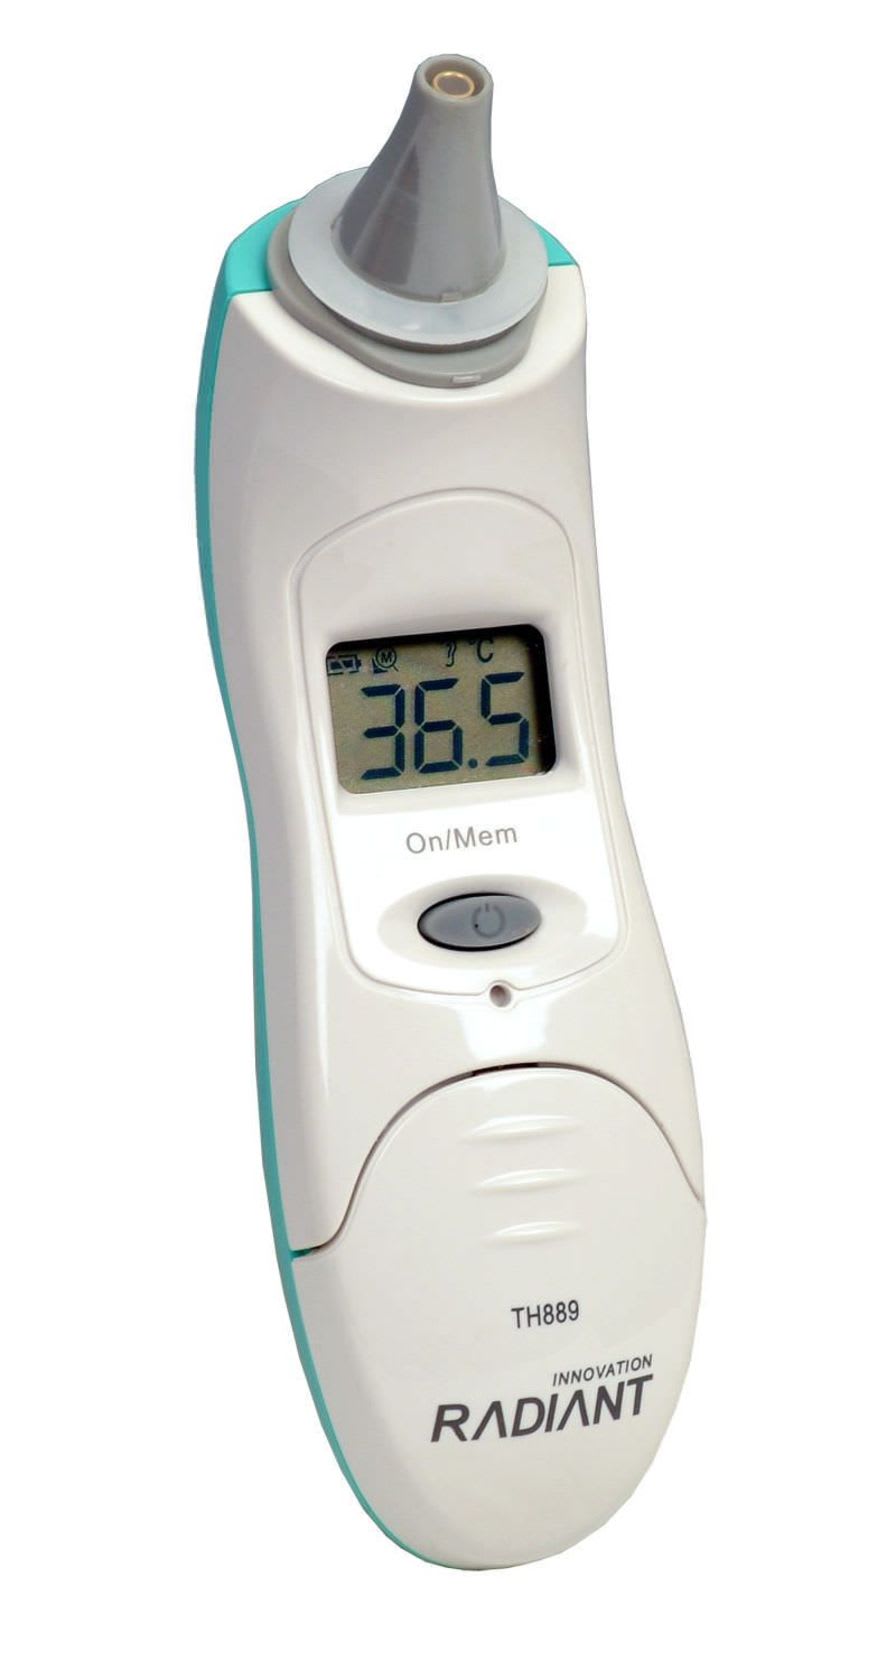 Medical thermometer / electronic / ear 34 ... 42.2 °C | TH889 Radiant Innovation